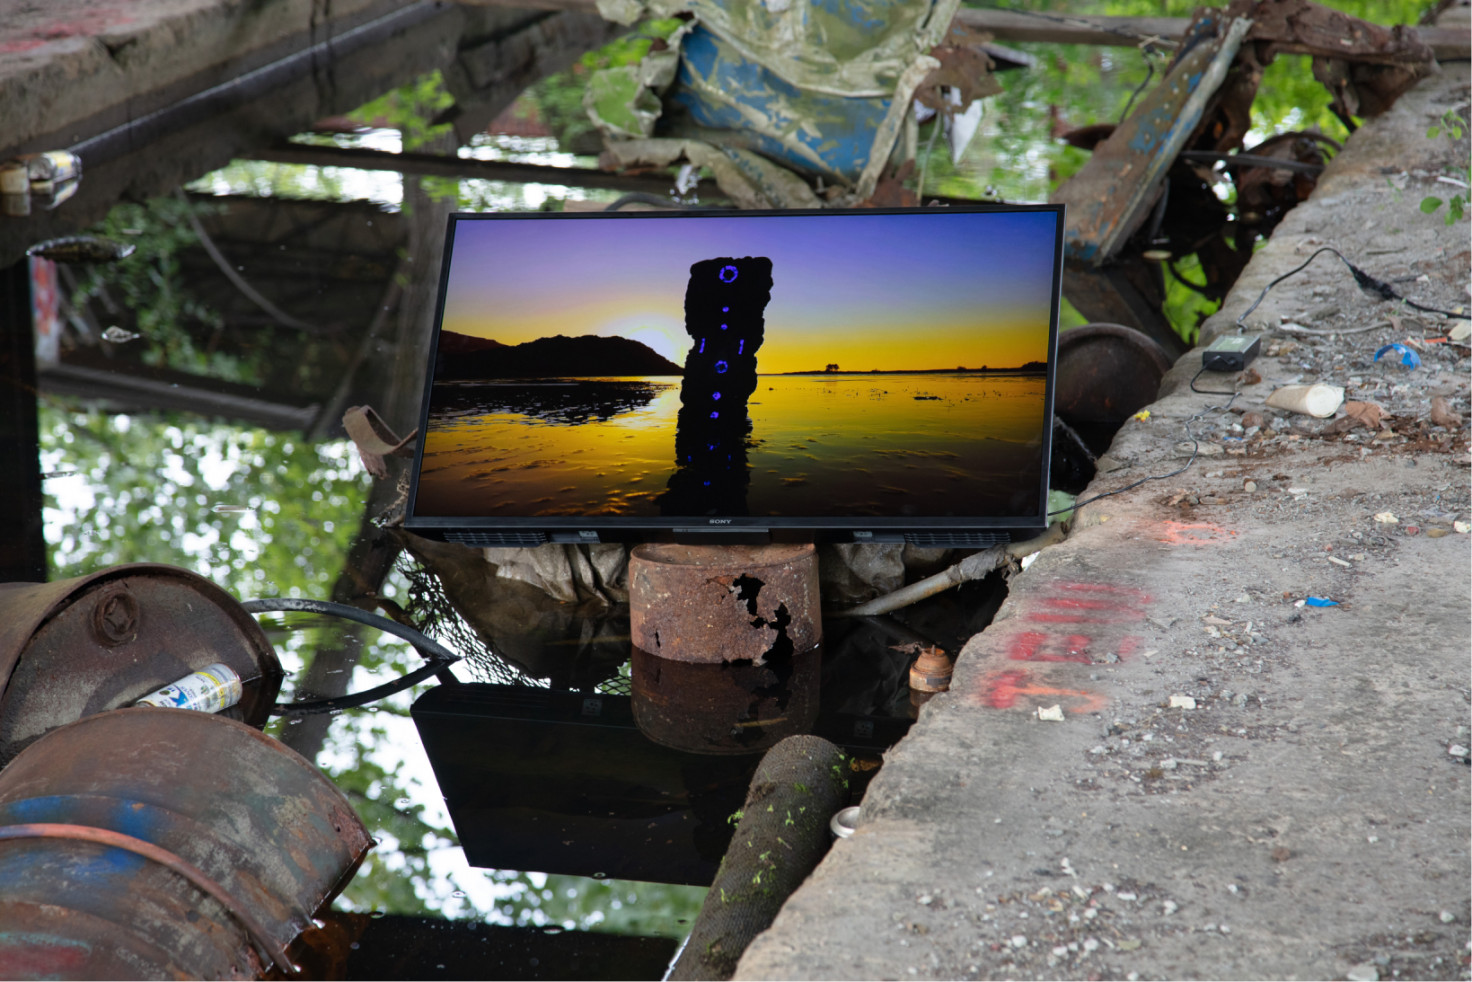 A video showing a monolith emerging from water at sunset plays on a screen installed in a trash-filled pool